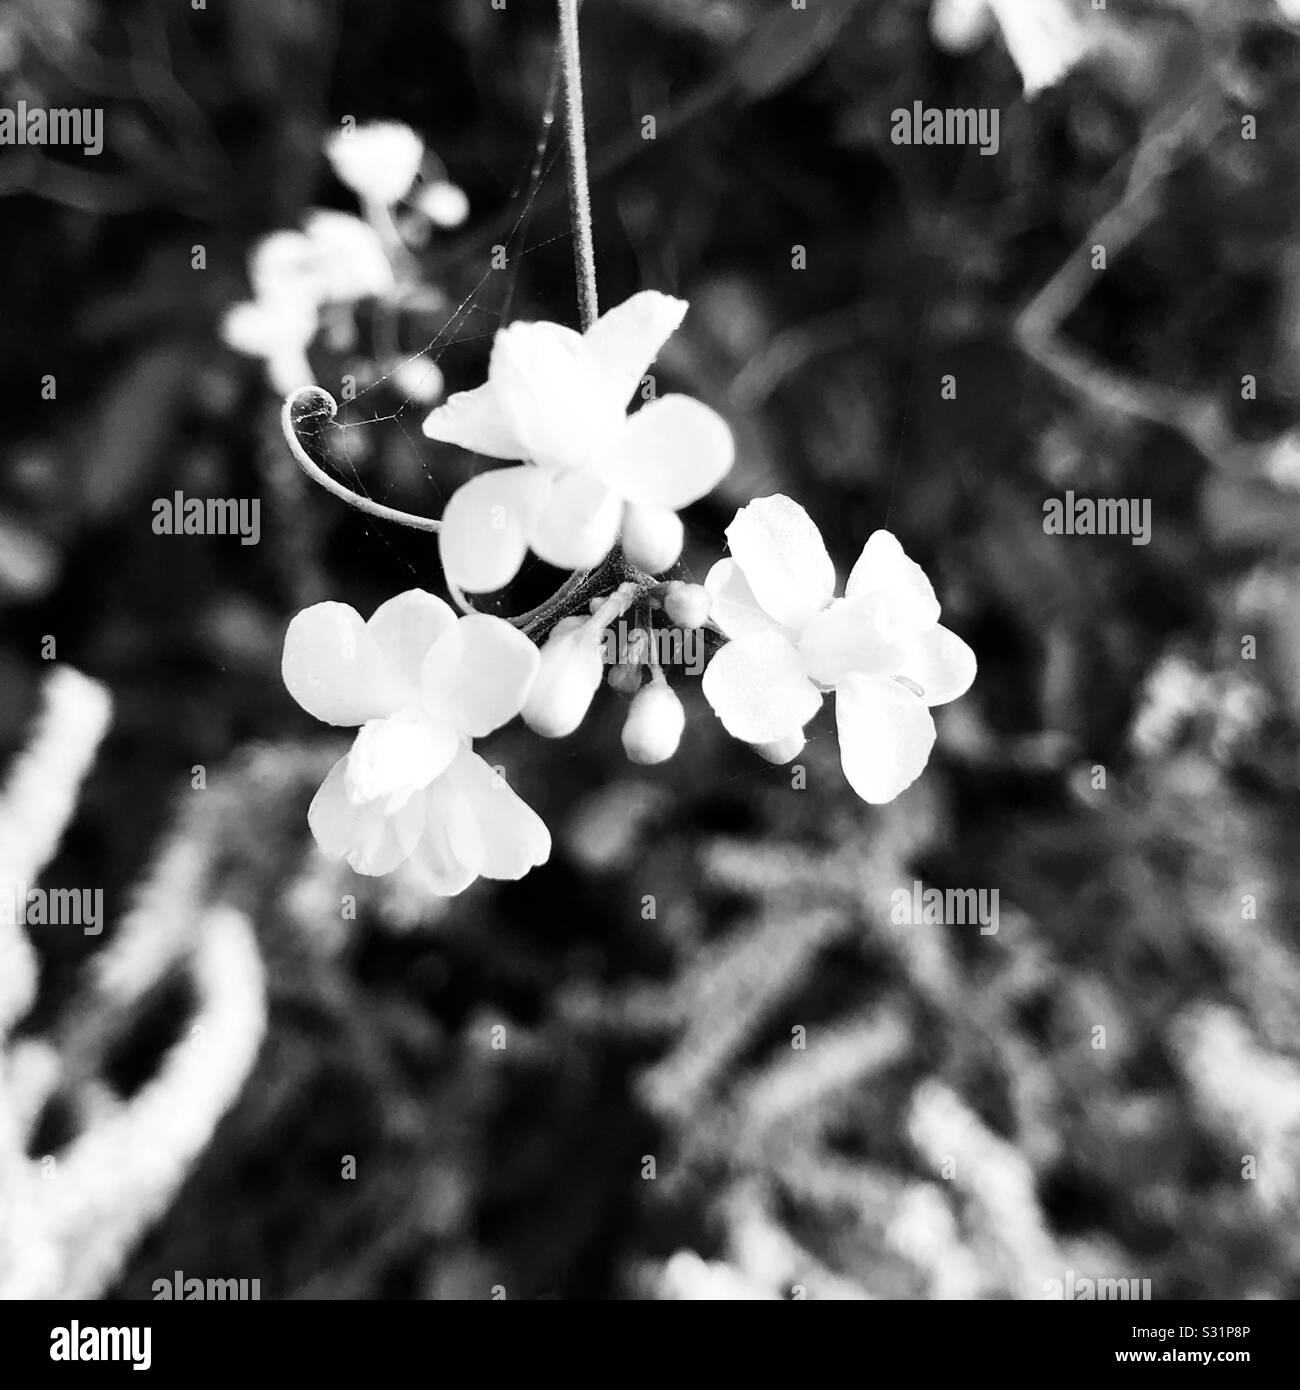 Shrub flower in black & white image , a string with bunch of flowers resembles like bouquet- Oxalis barrelieri aka Lavender sorrel Stock Photo